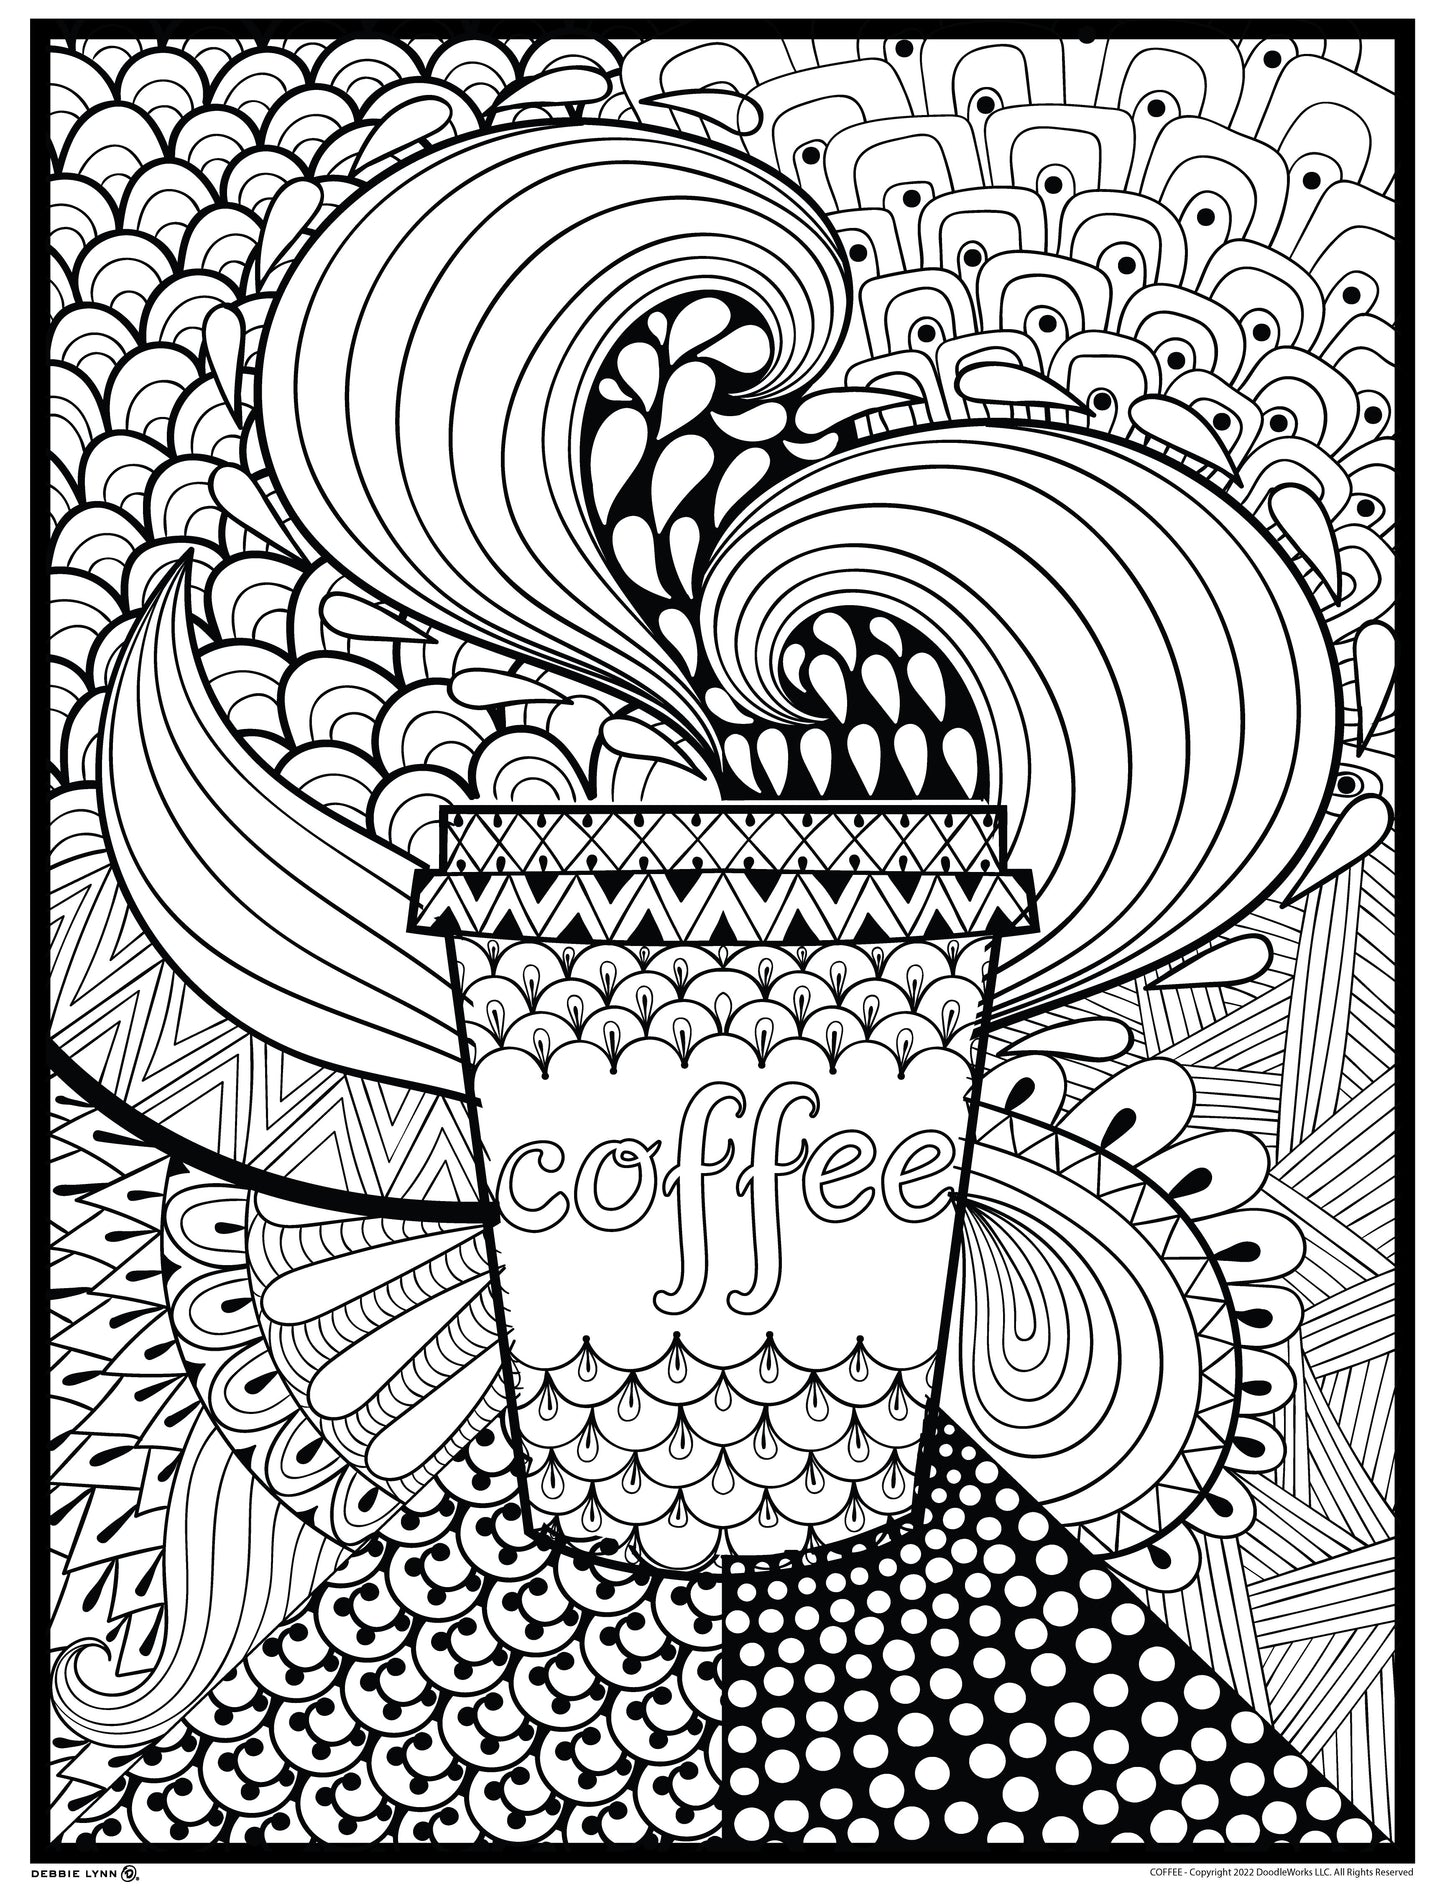 Coffee Personalized Giant Coloring Poster 46"x60"